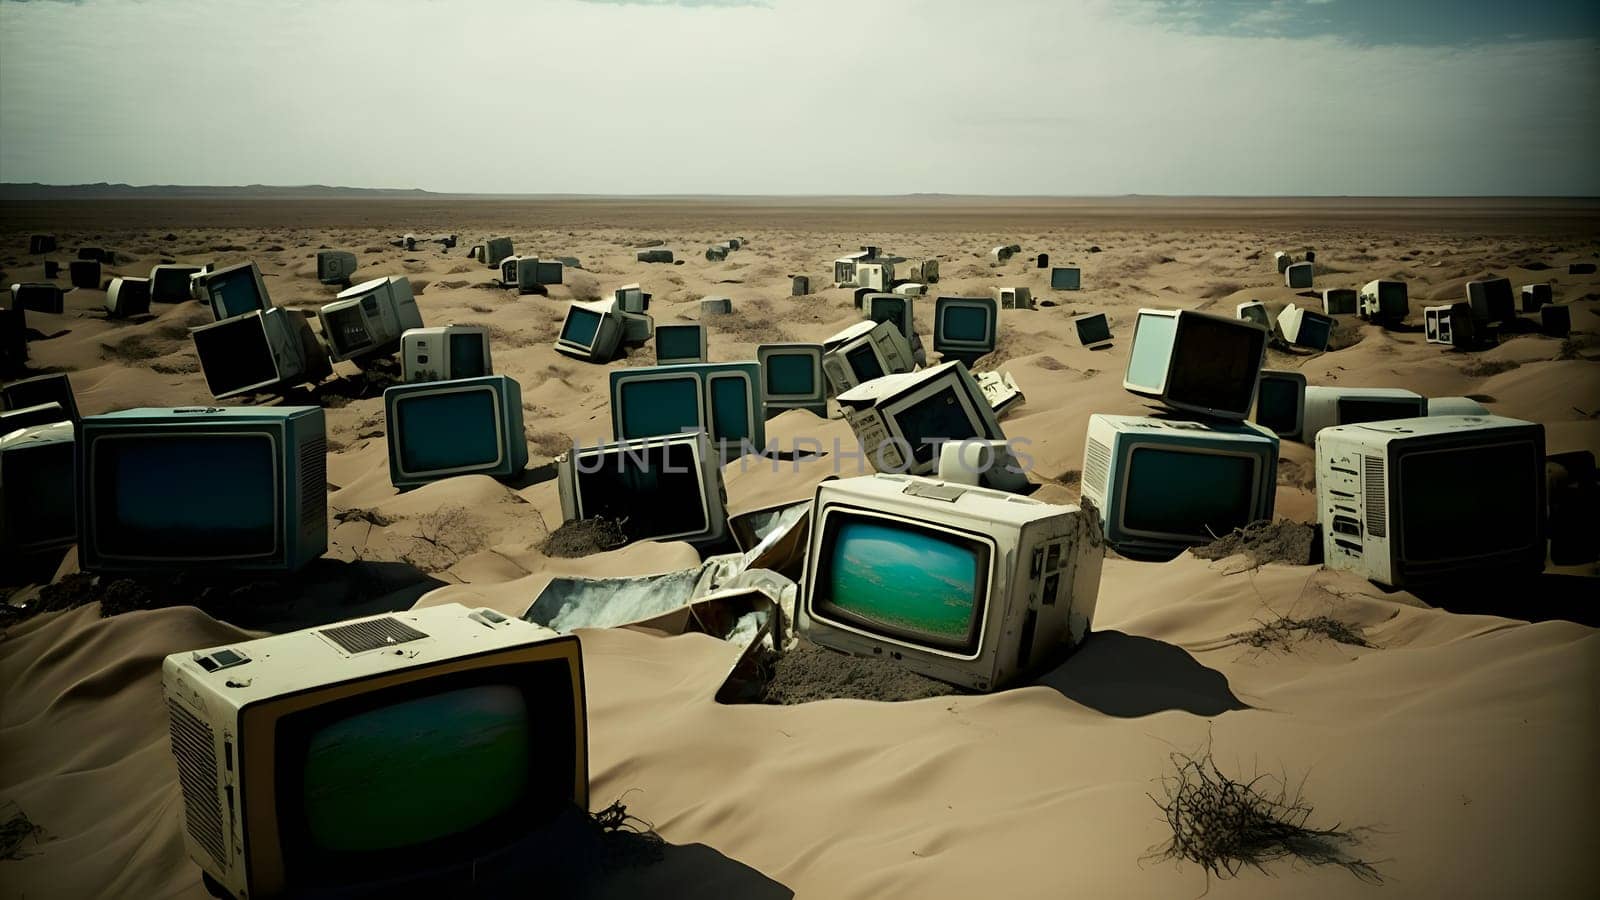 desert covered with old analog tv sets at summer daylight, neural network generated art by z1b